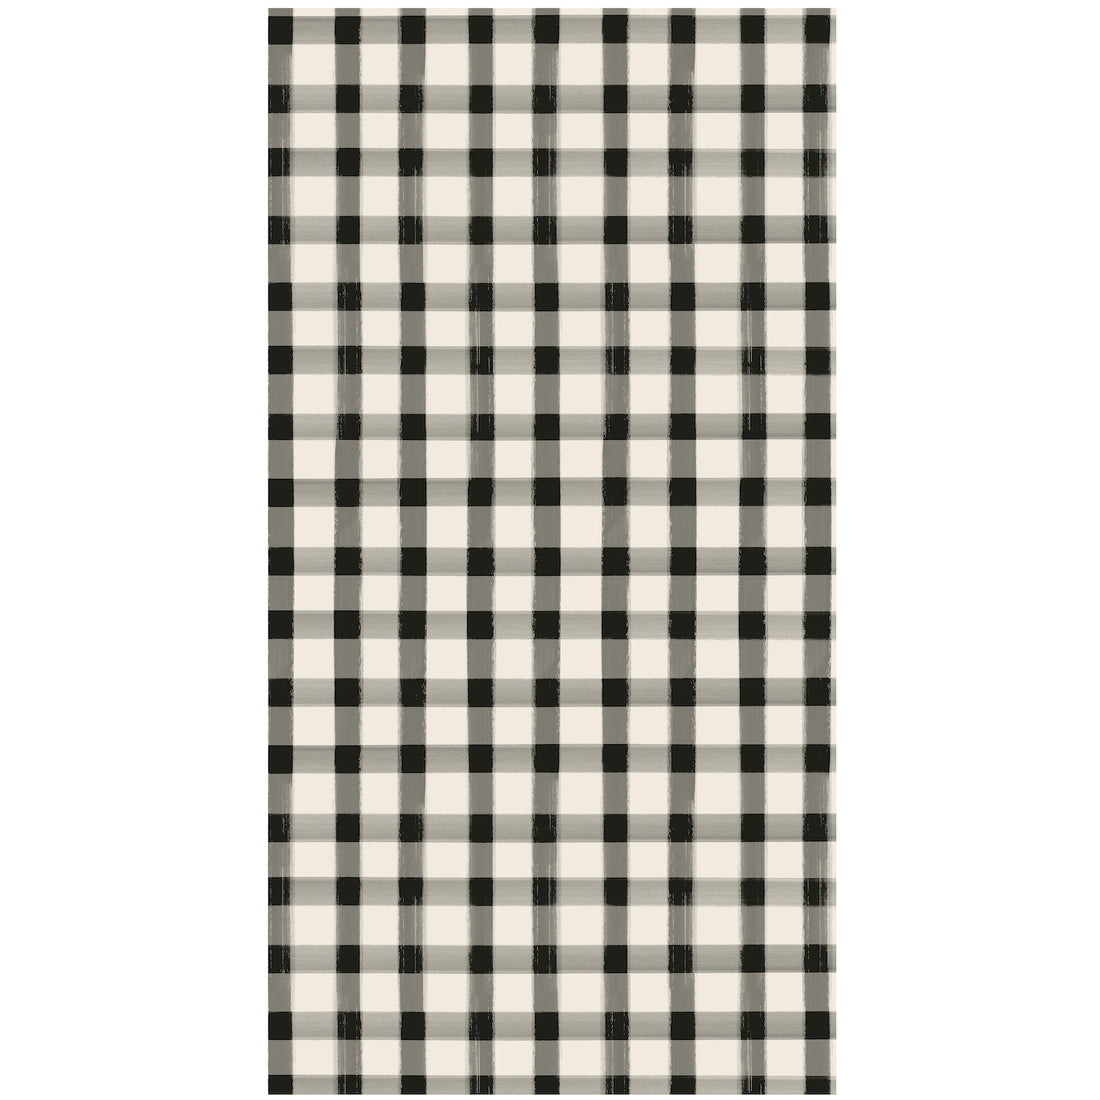 A rectangle guest napkin featuring a painted gingham grid check pattern made of gray lines intersecting at black squares, on a white background.